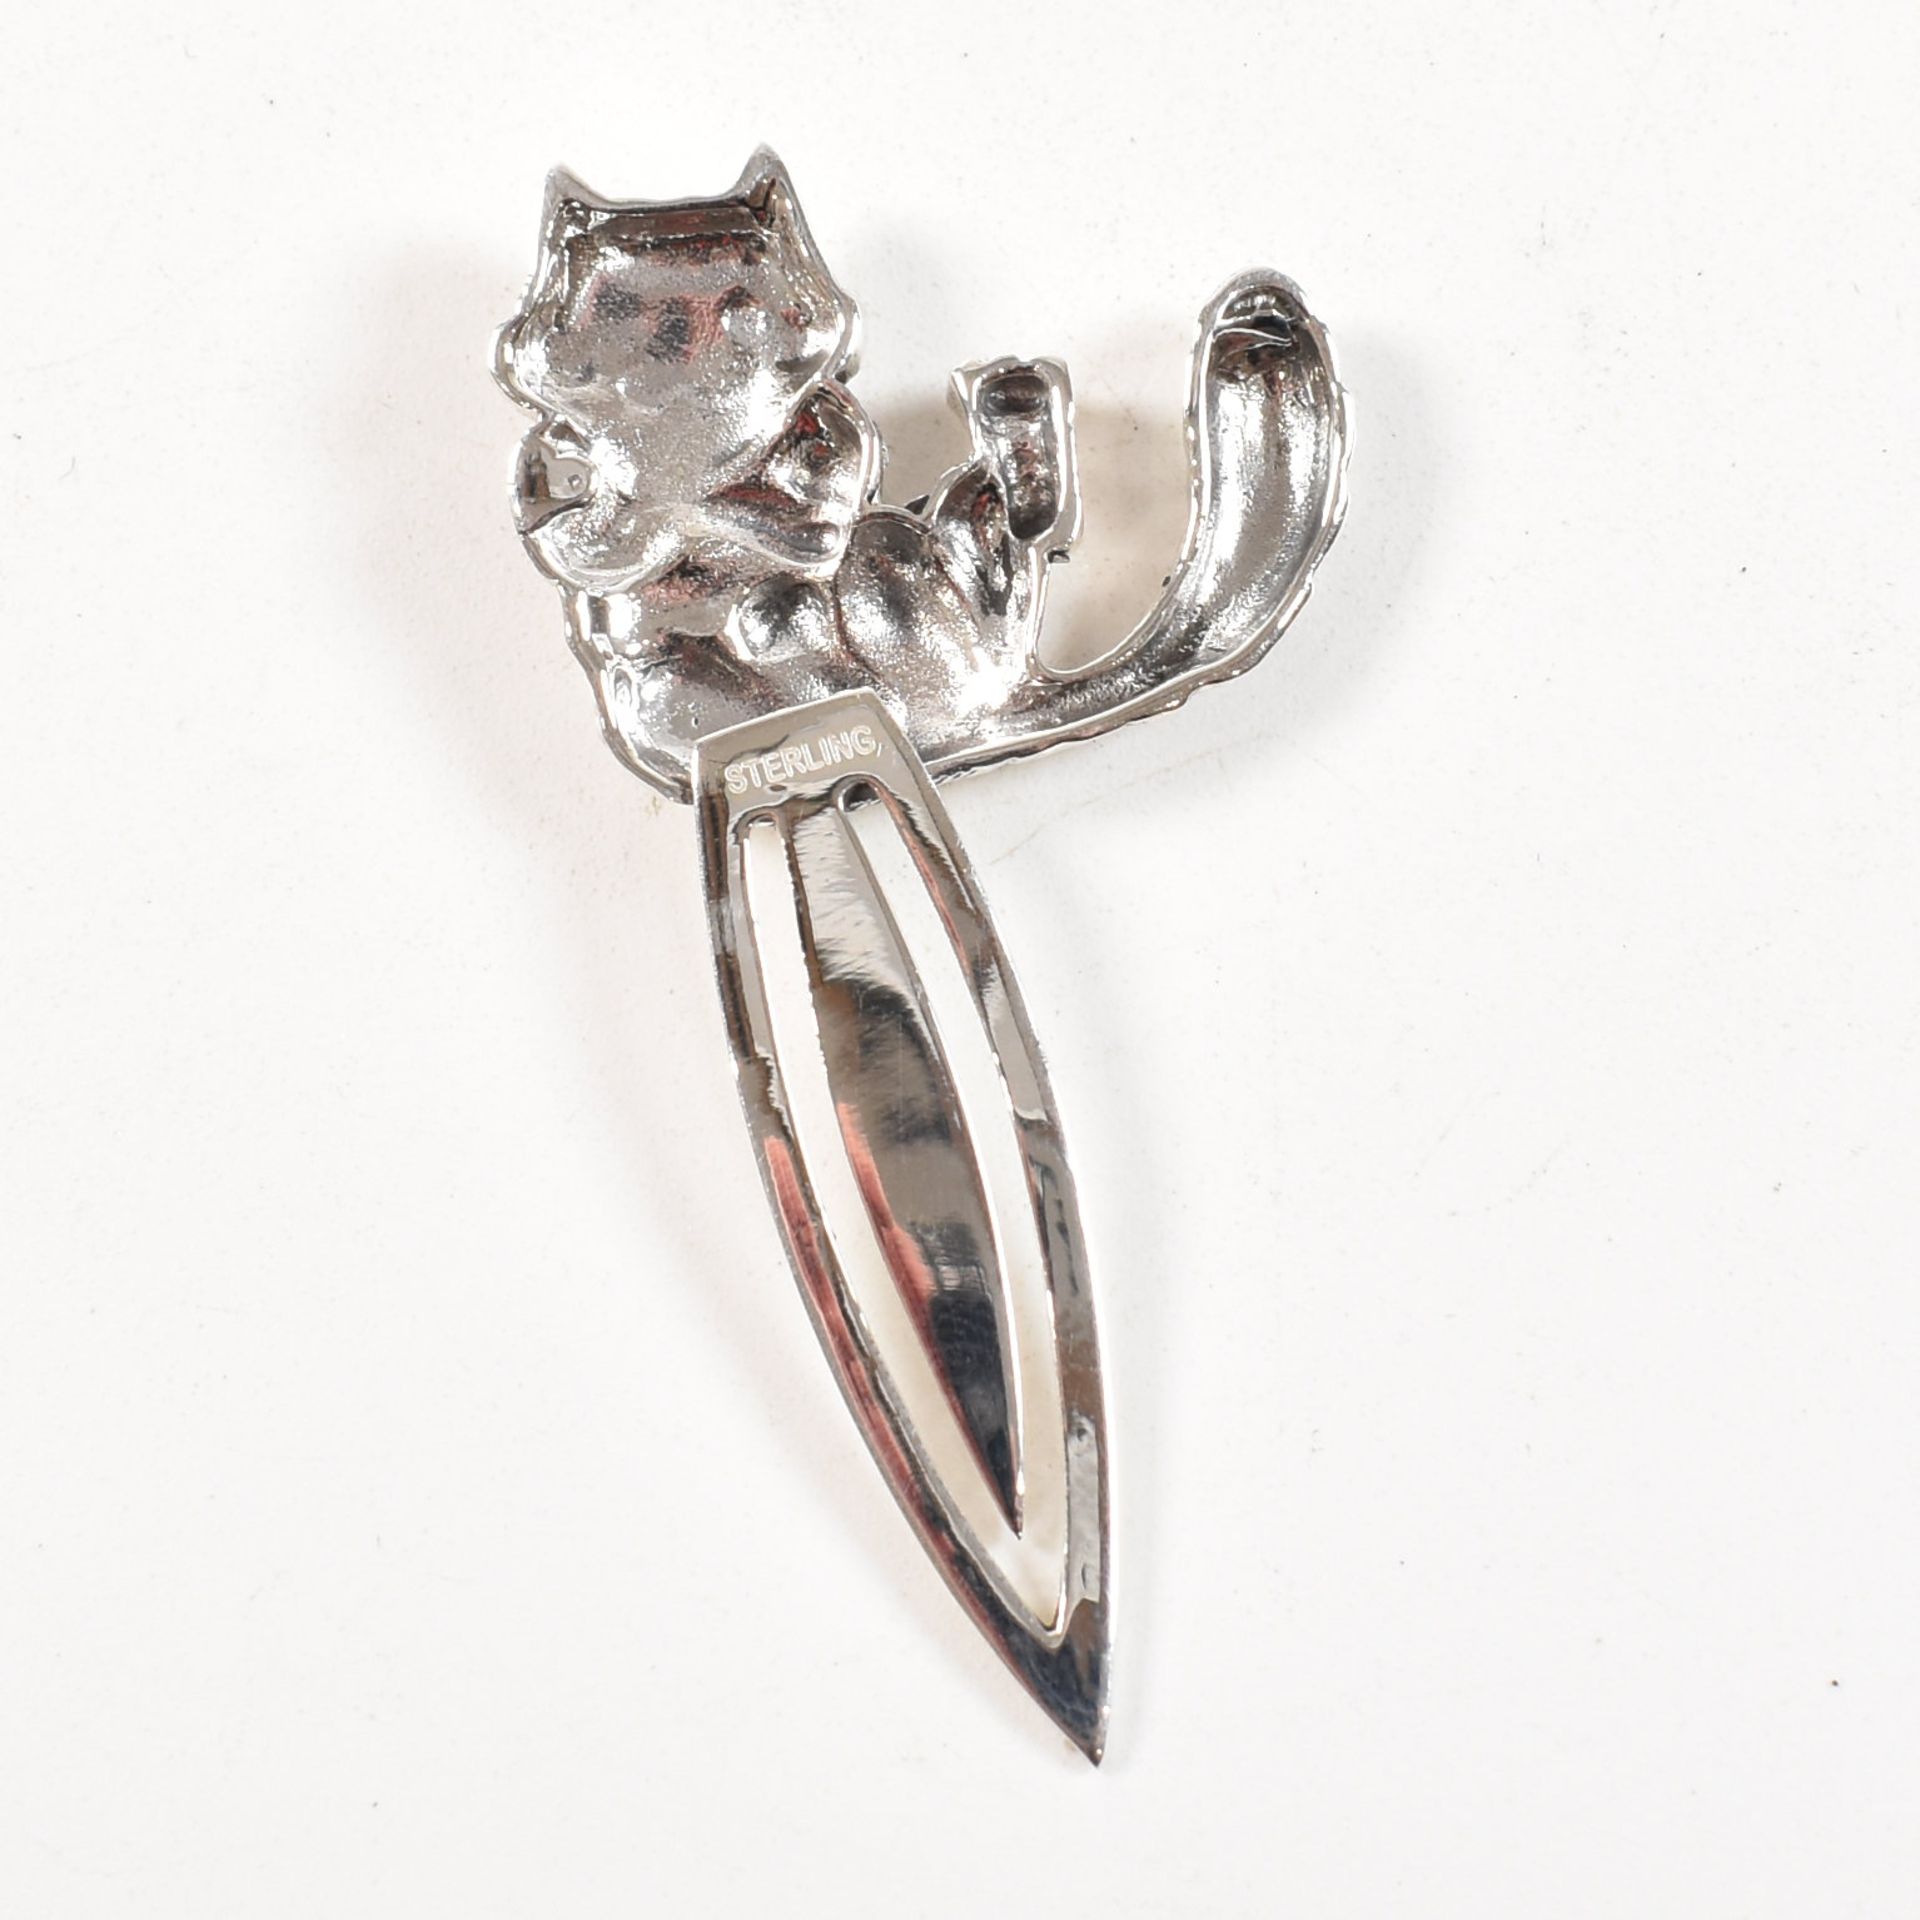 CONTEMPORARY STERLING NOVELTY CAT BOOKMARK - Image 2 of 3